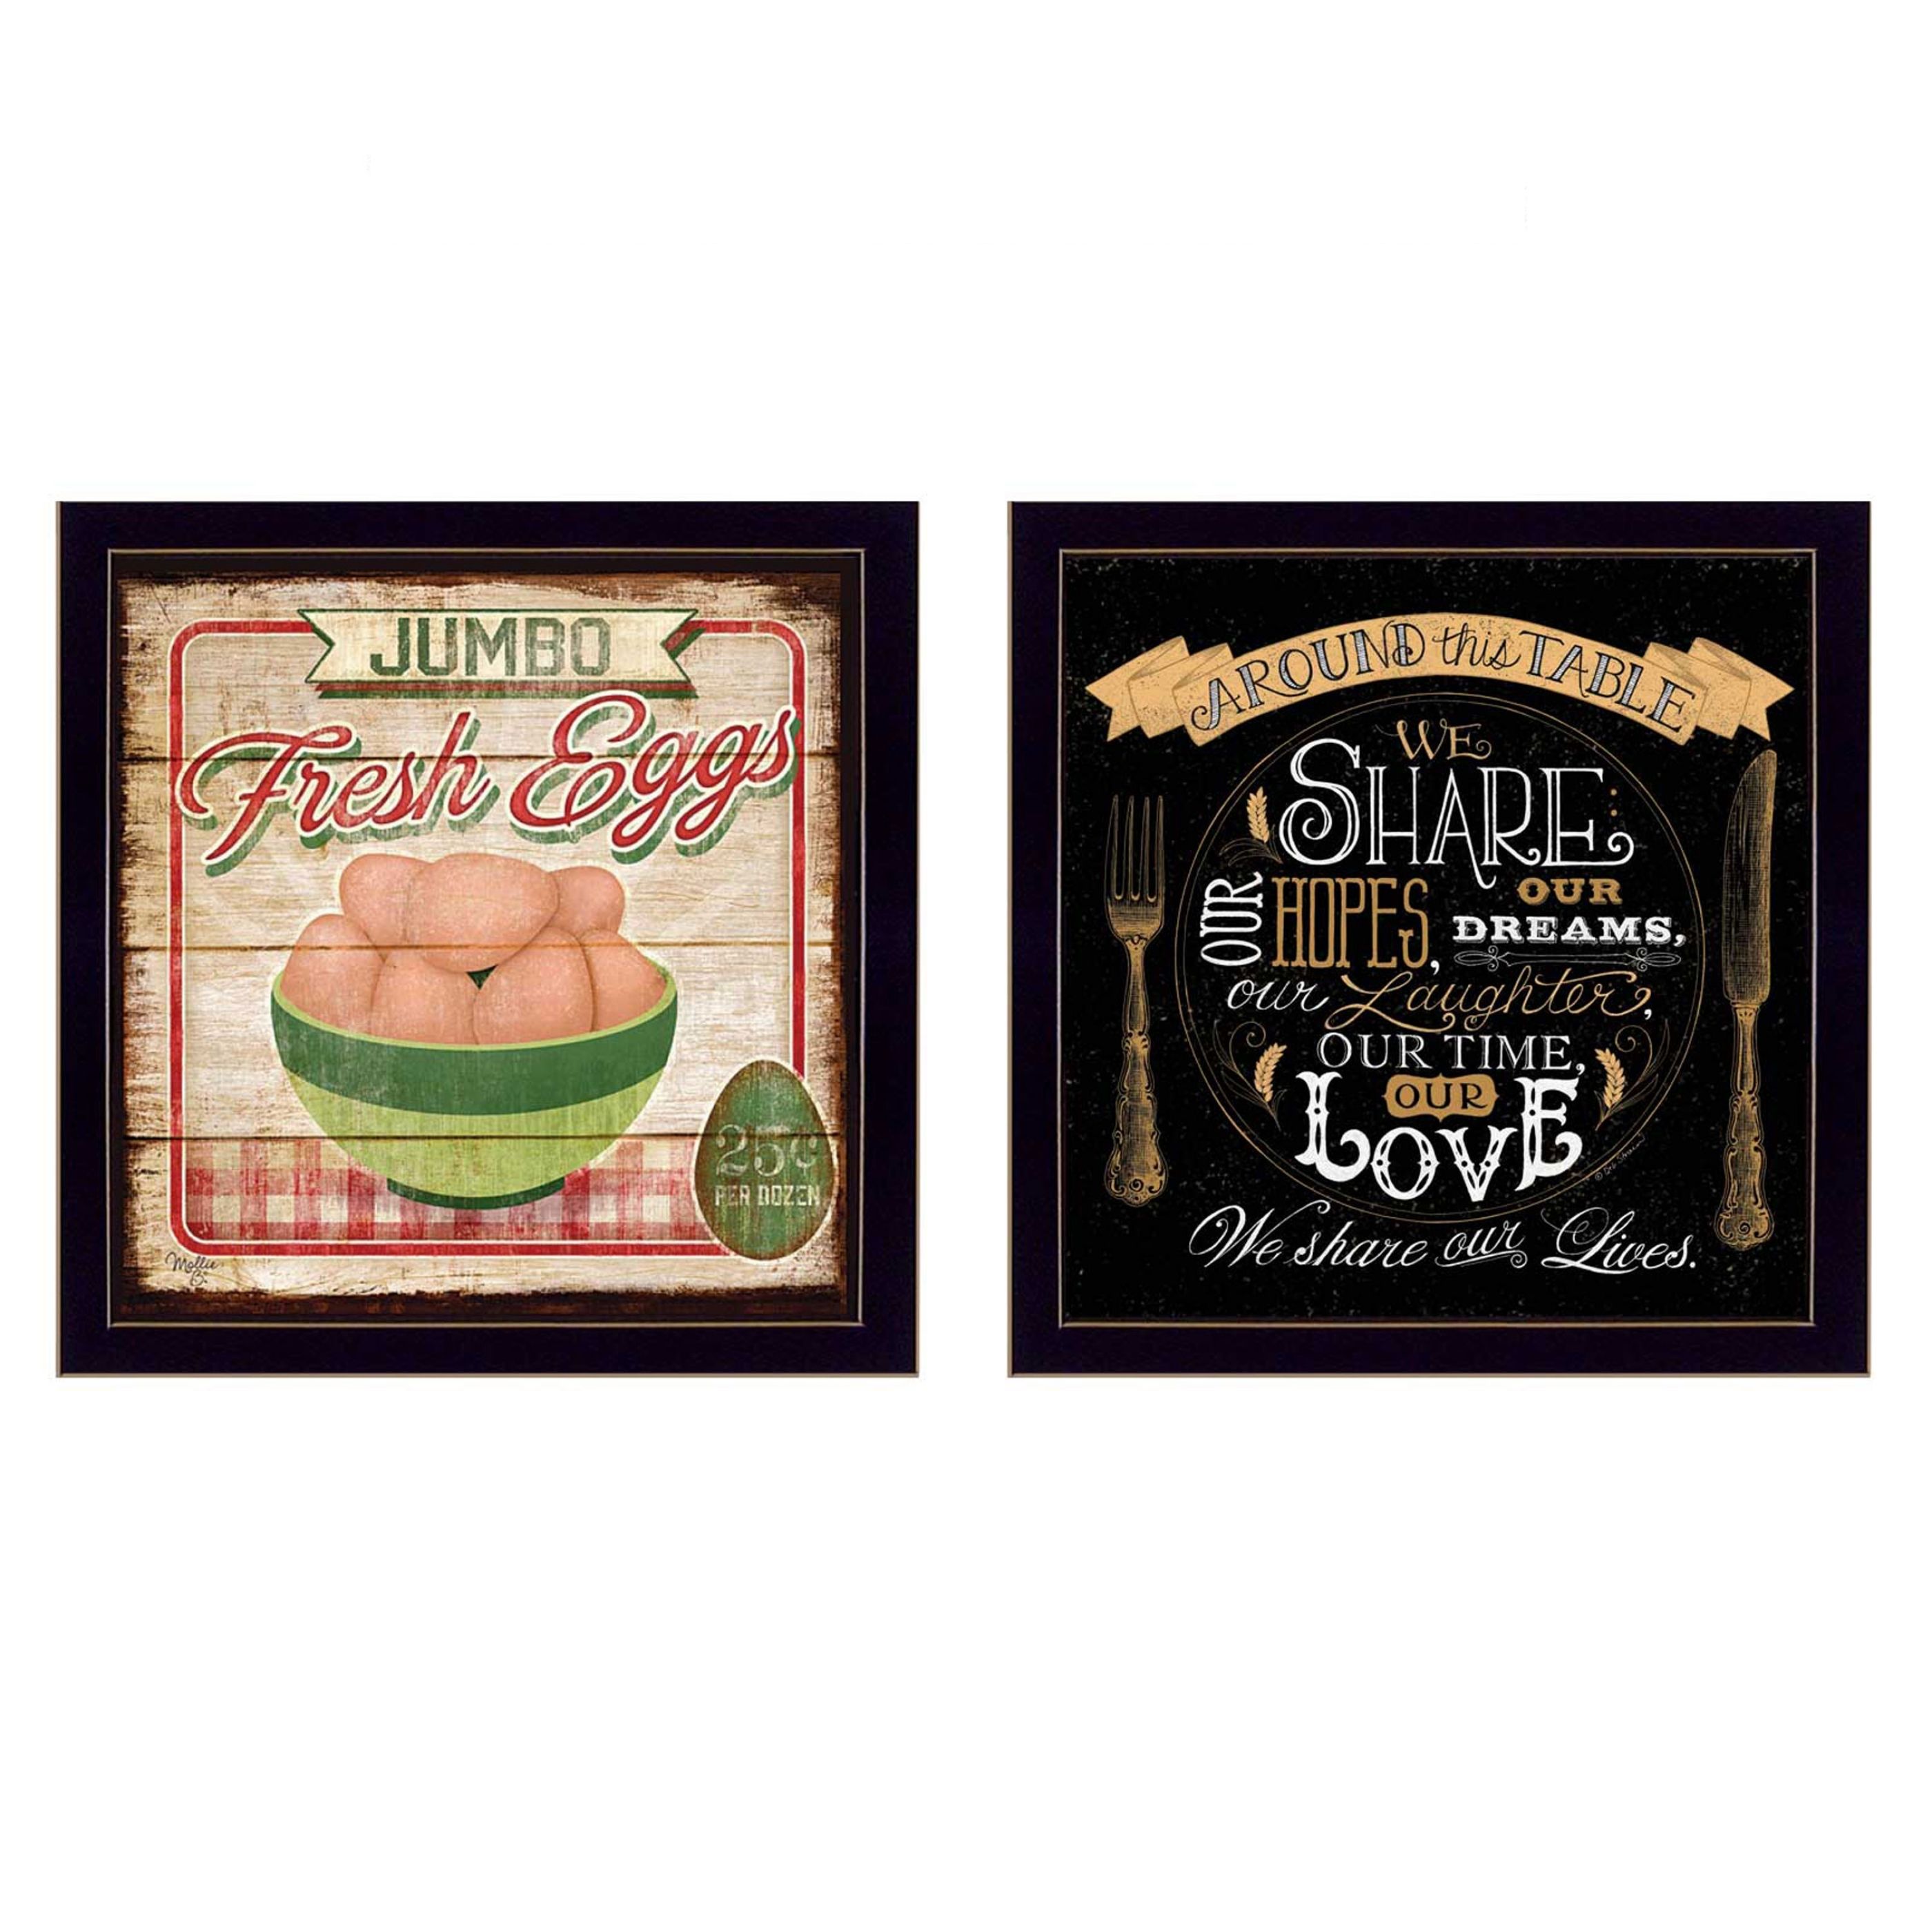 "Around the Table Collection" 2-Piece Vignette By Mollie B. and D. Strain, Printed Wall Art, Ready To Hang Framed Poster, Black Frame